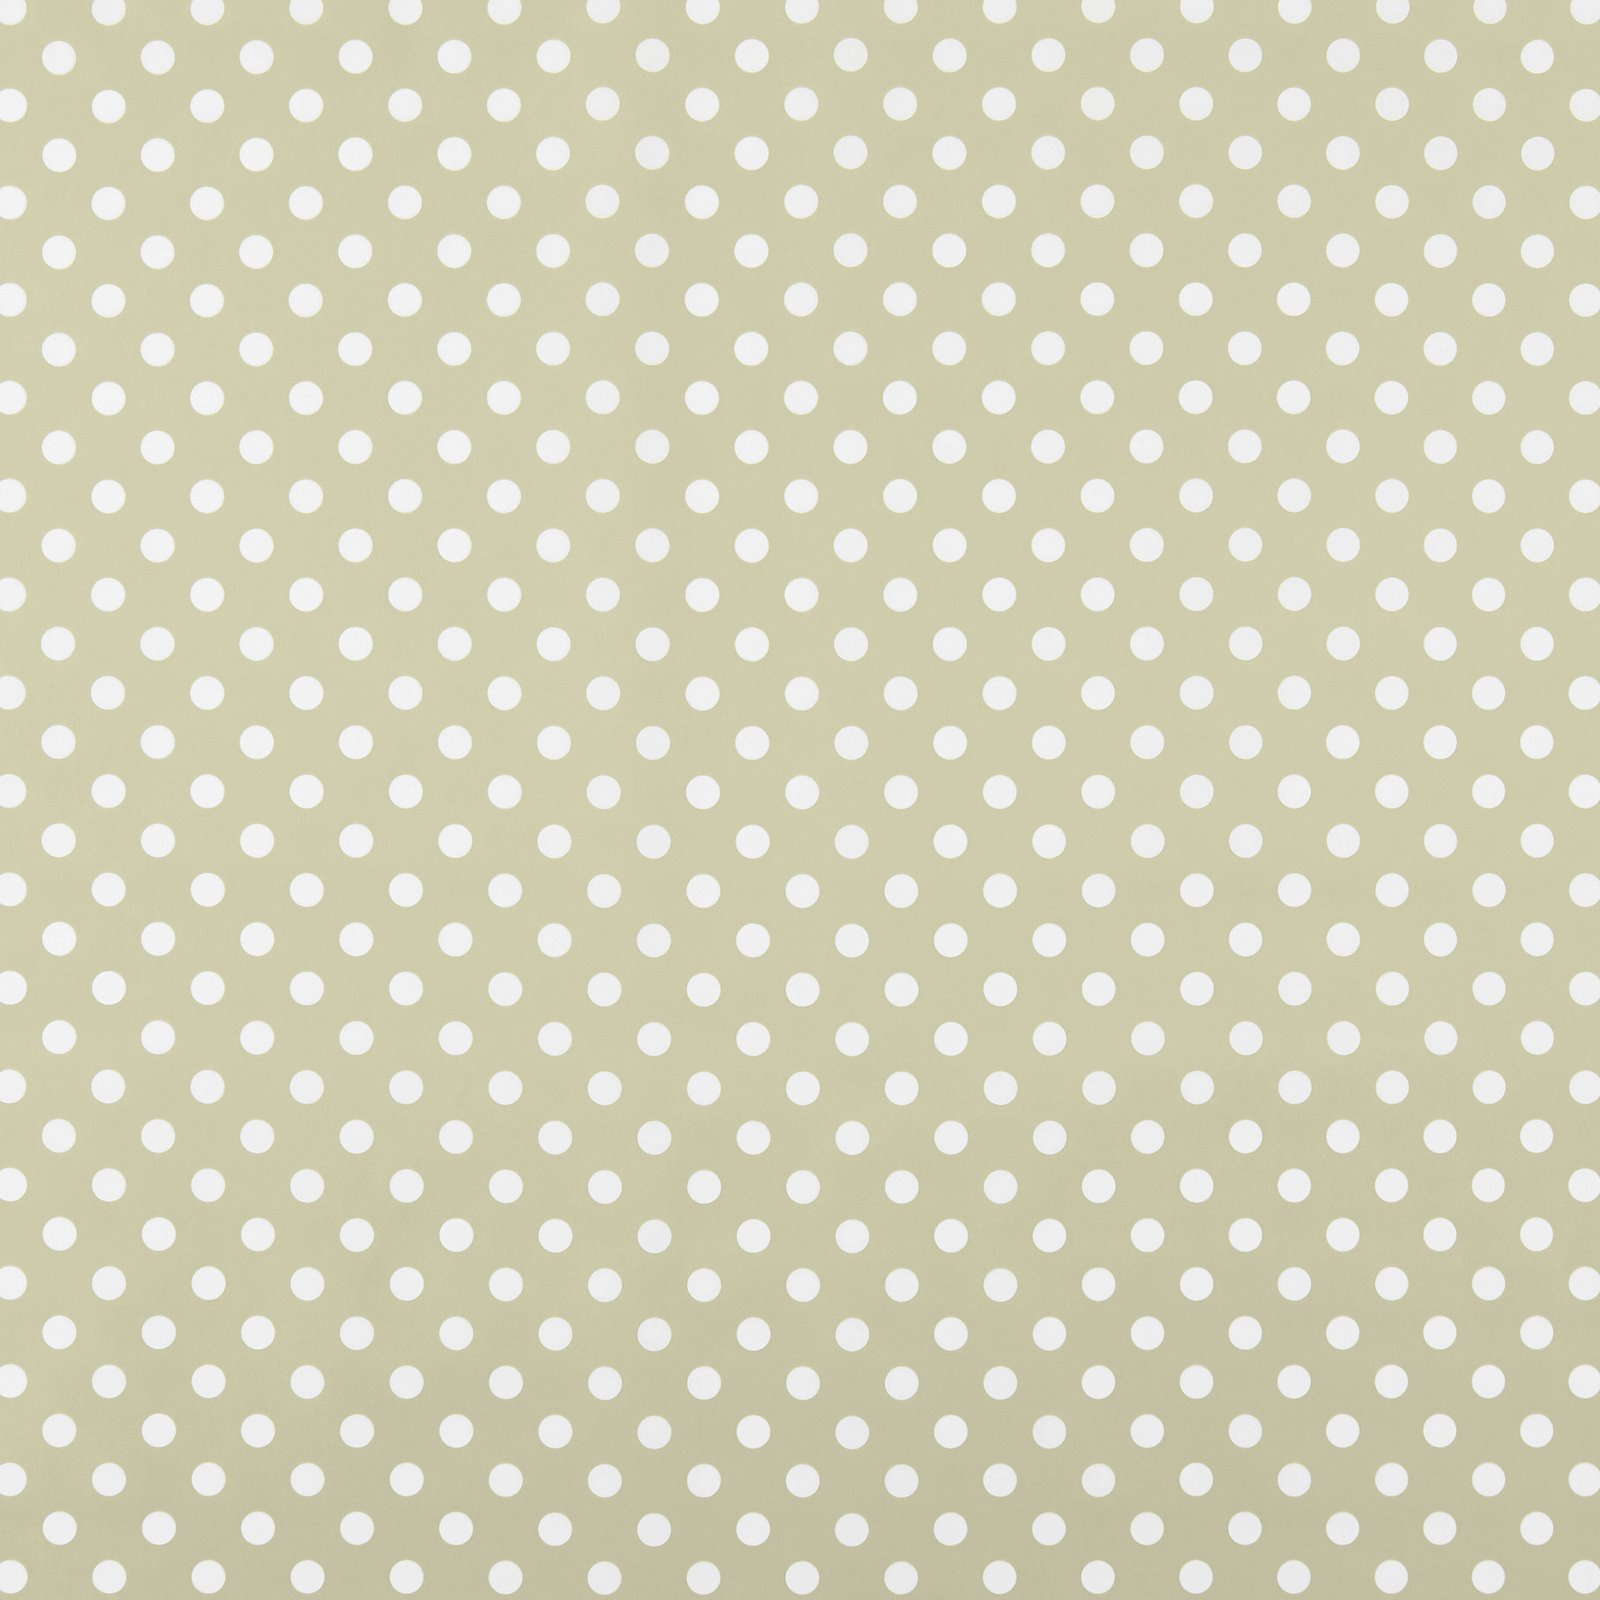 Non-woven oil cloth sand w white dots 861412_pack_sp